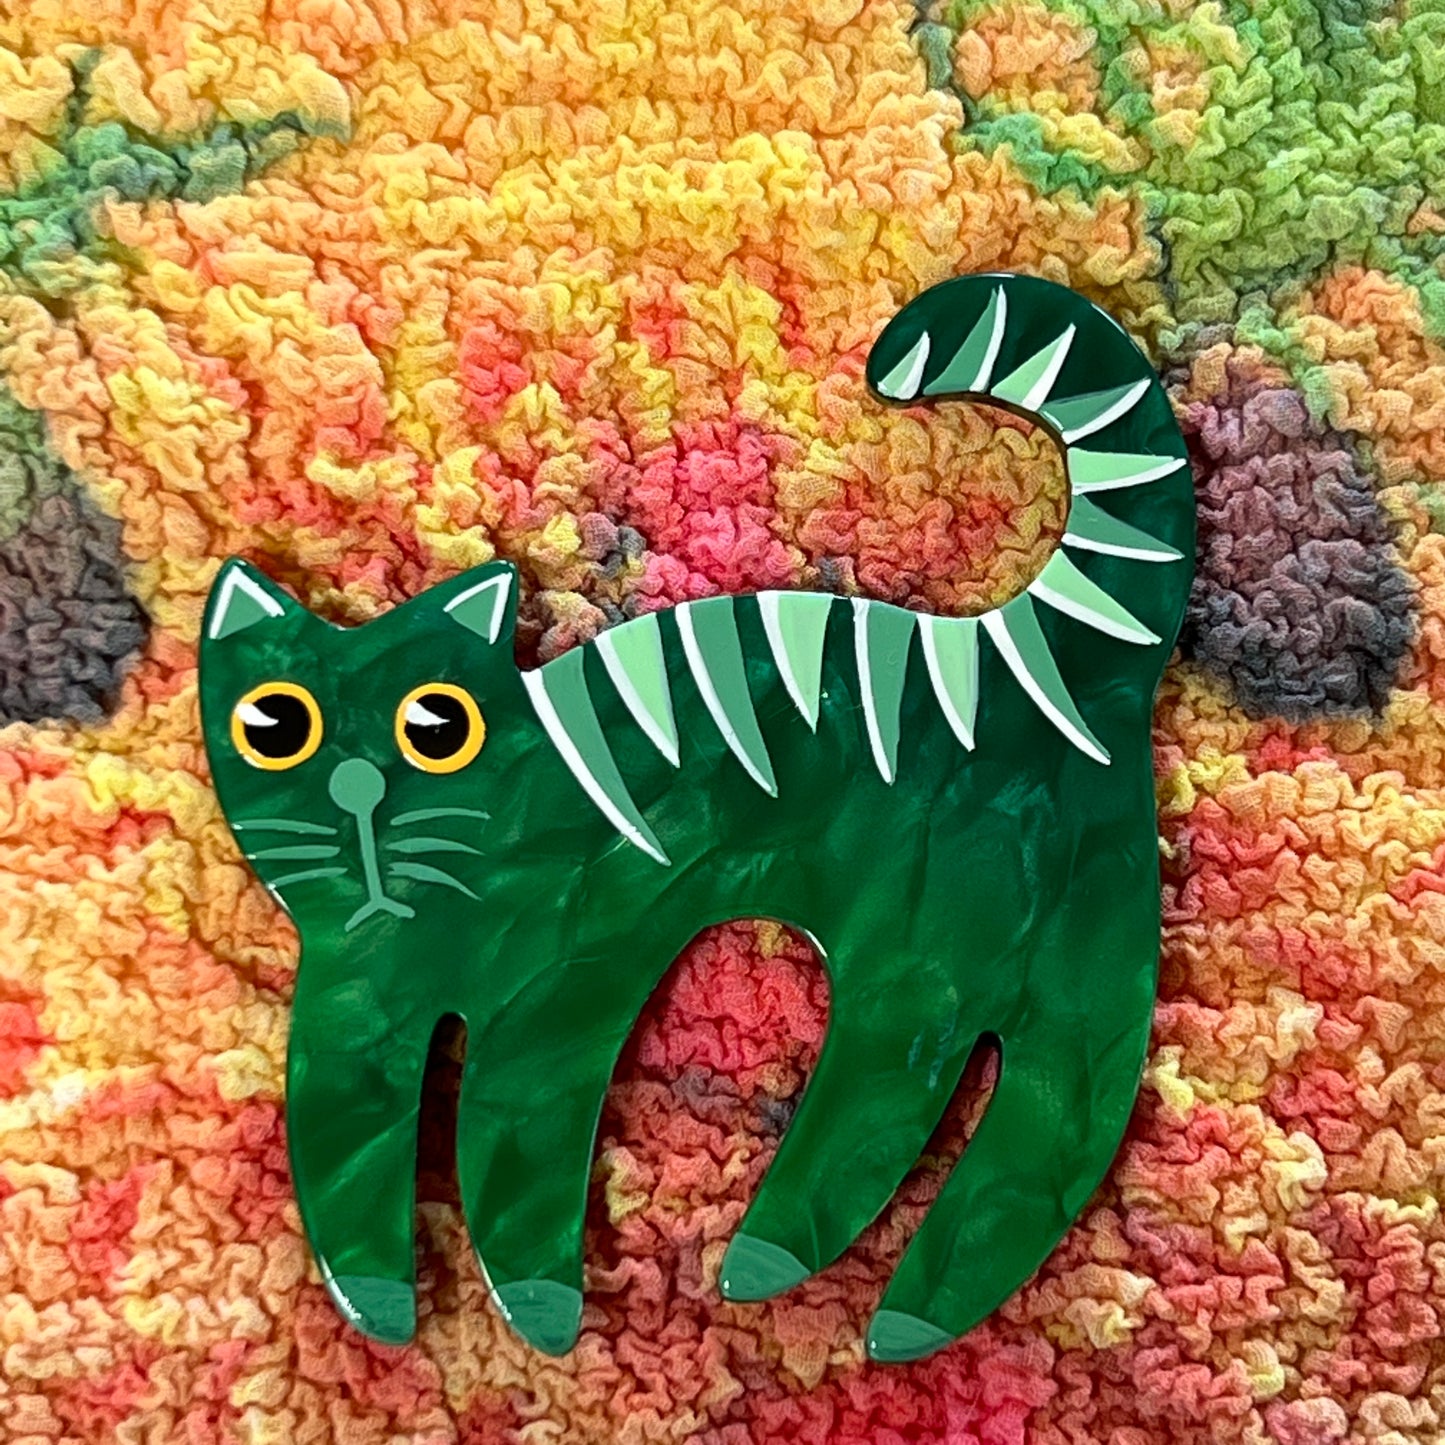 The Wilson Cat Brooch in its Venice Green Version in galalith